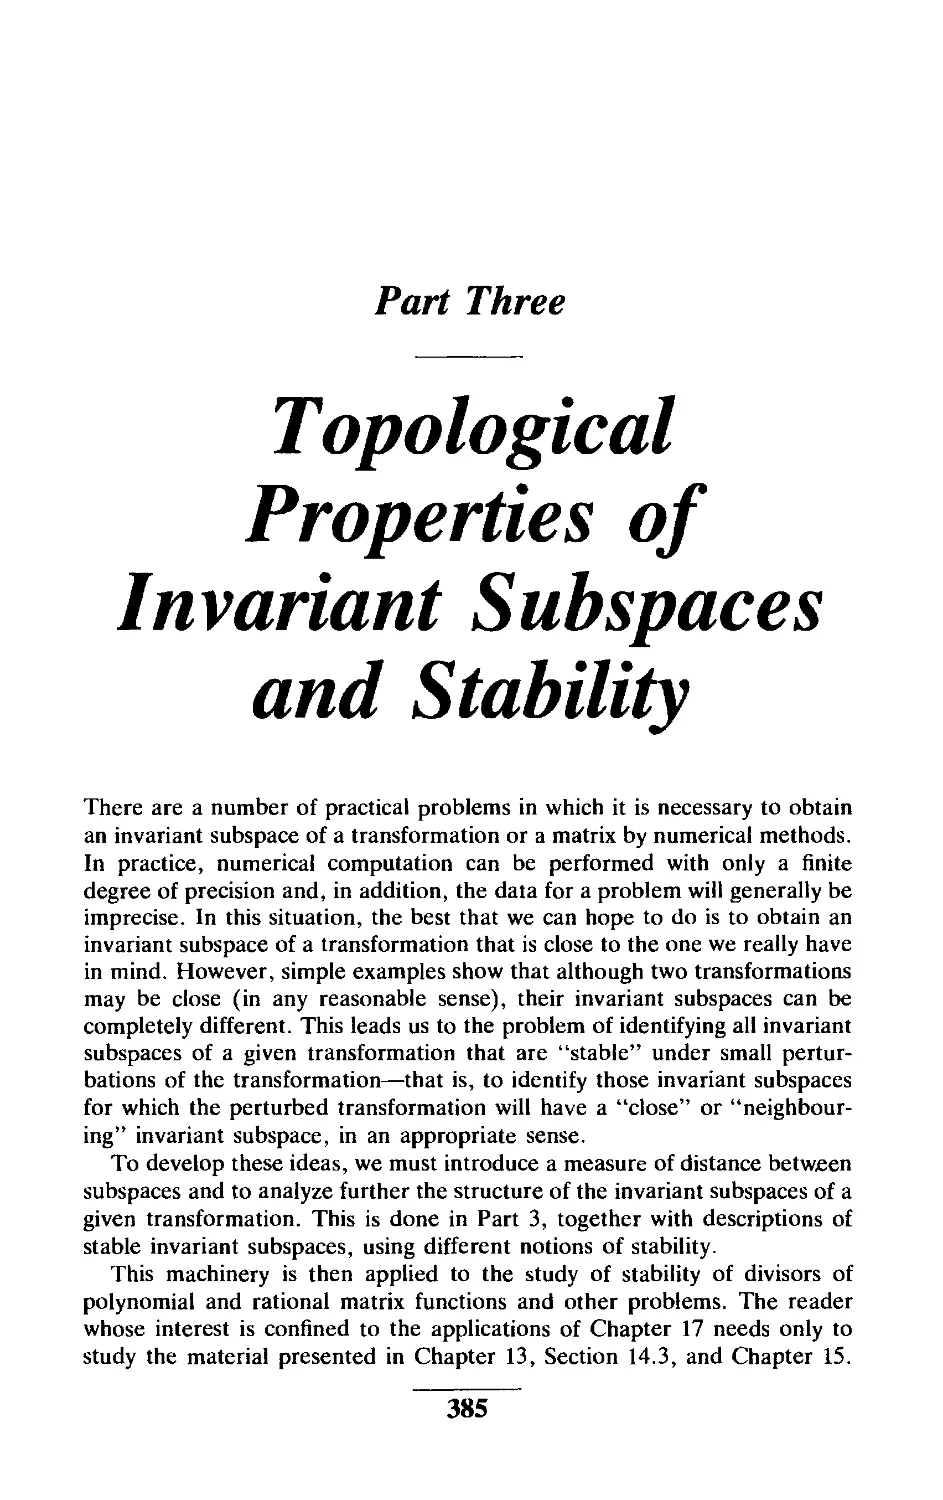 Part Three Topological Properties of Invariant Subspaces and Stability